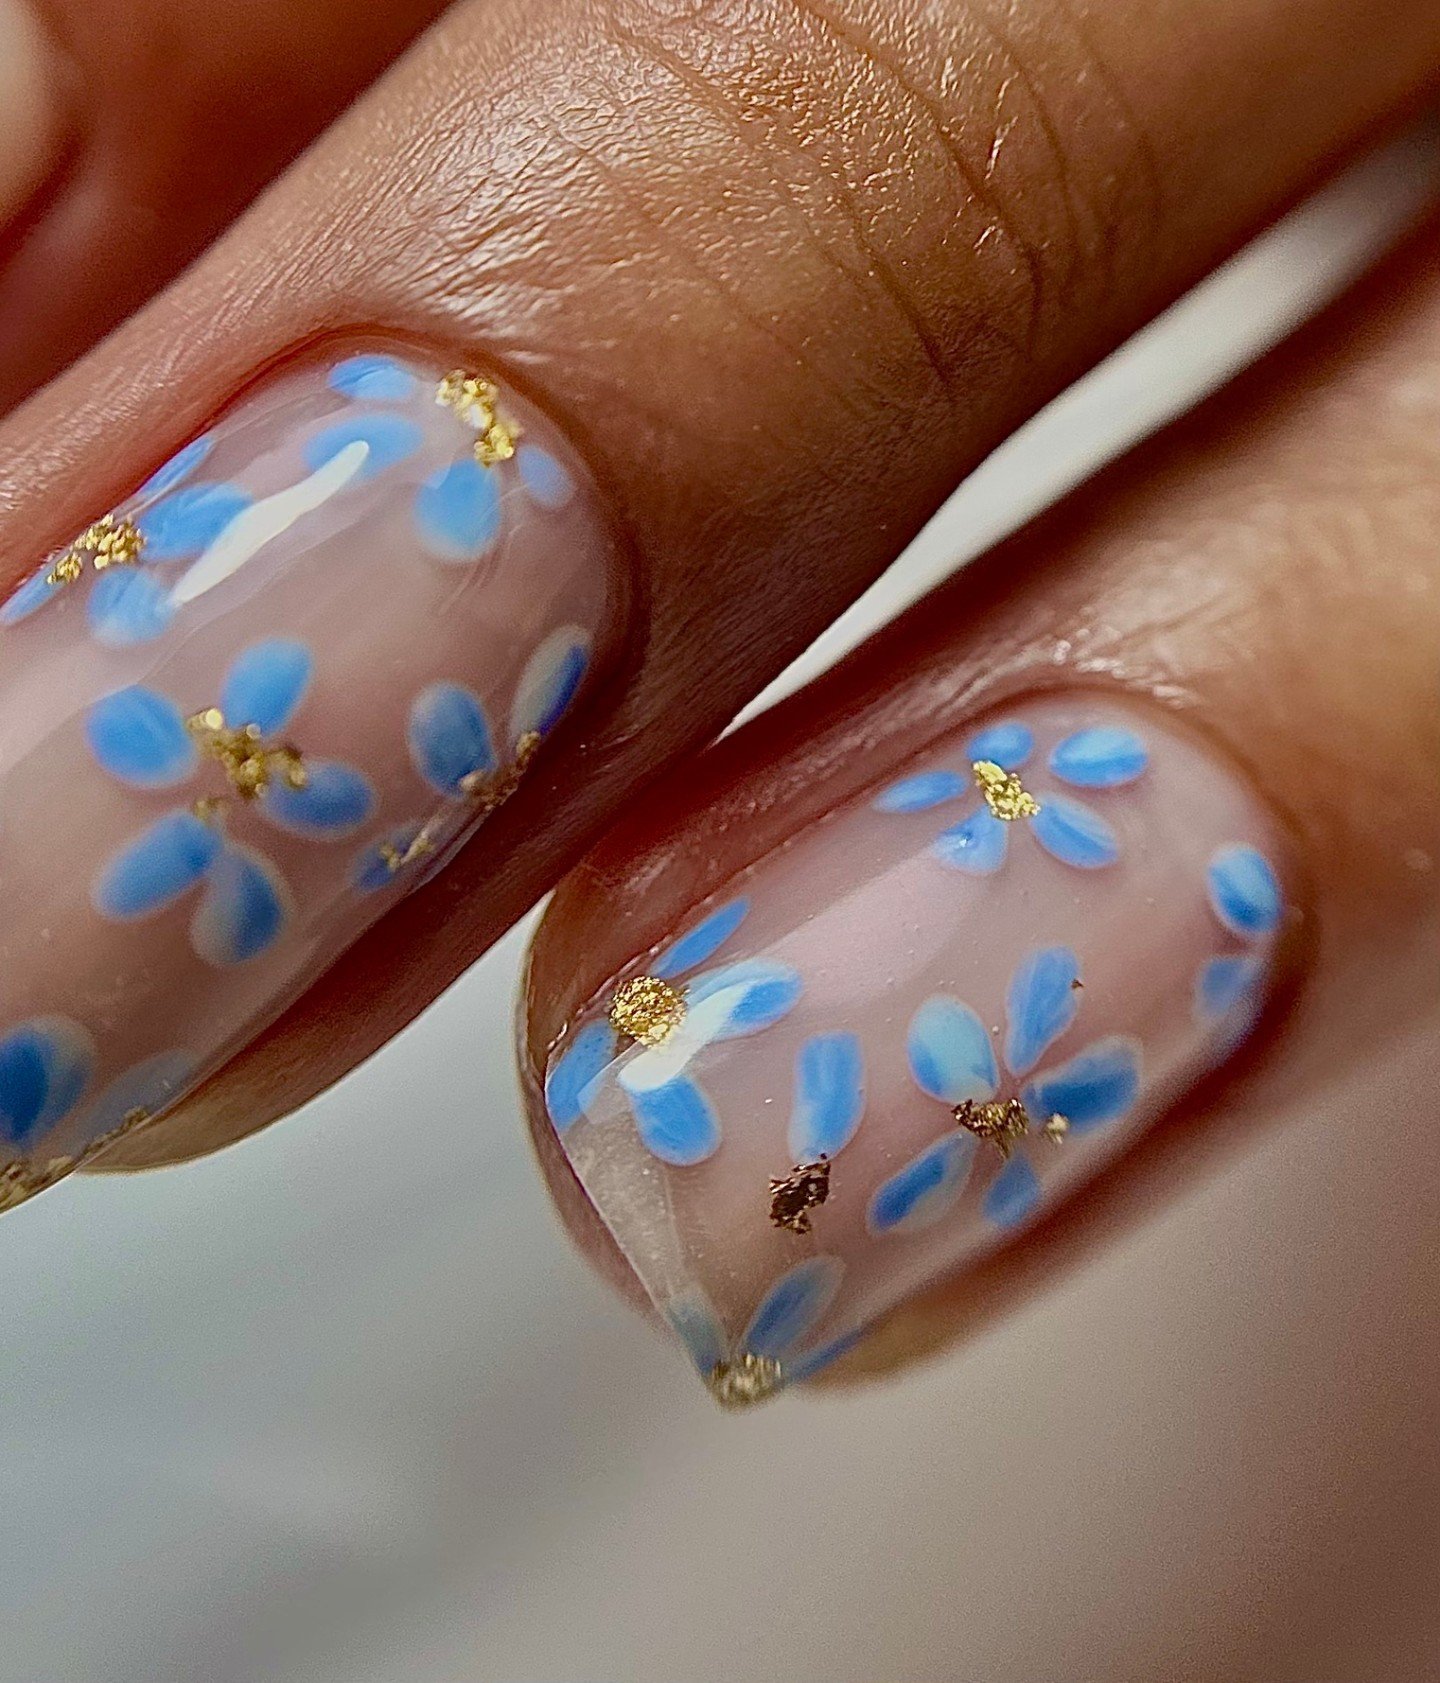 &ldquo;There are always flowers for those who want to see them. &ldquo;🪻Henri Matisse 

Book for Gel, BIAB or Extensions + category 2 art (up to 5 nails) or category 3 (full set). 

by #selfish_inna 🧚&zwj;♂️
.
.
.
.

 #ukranianmanicurelondon #russi